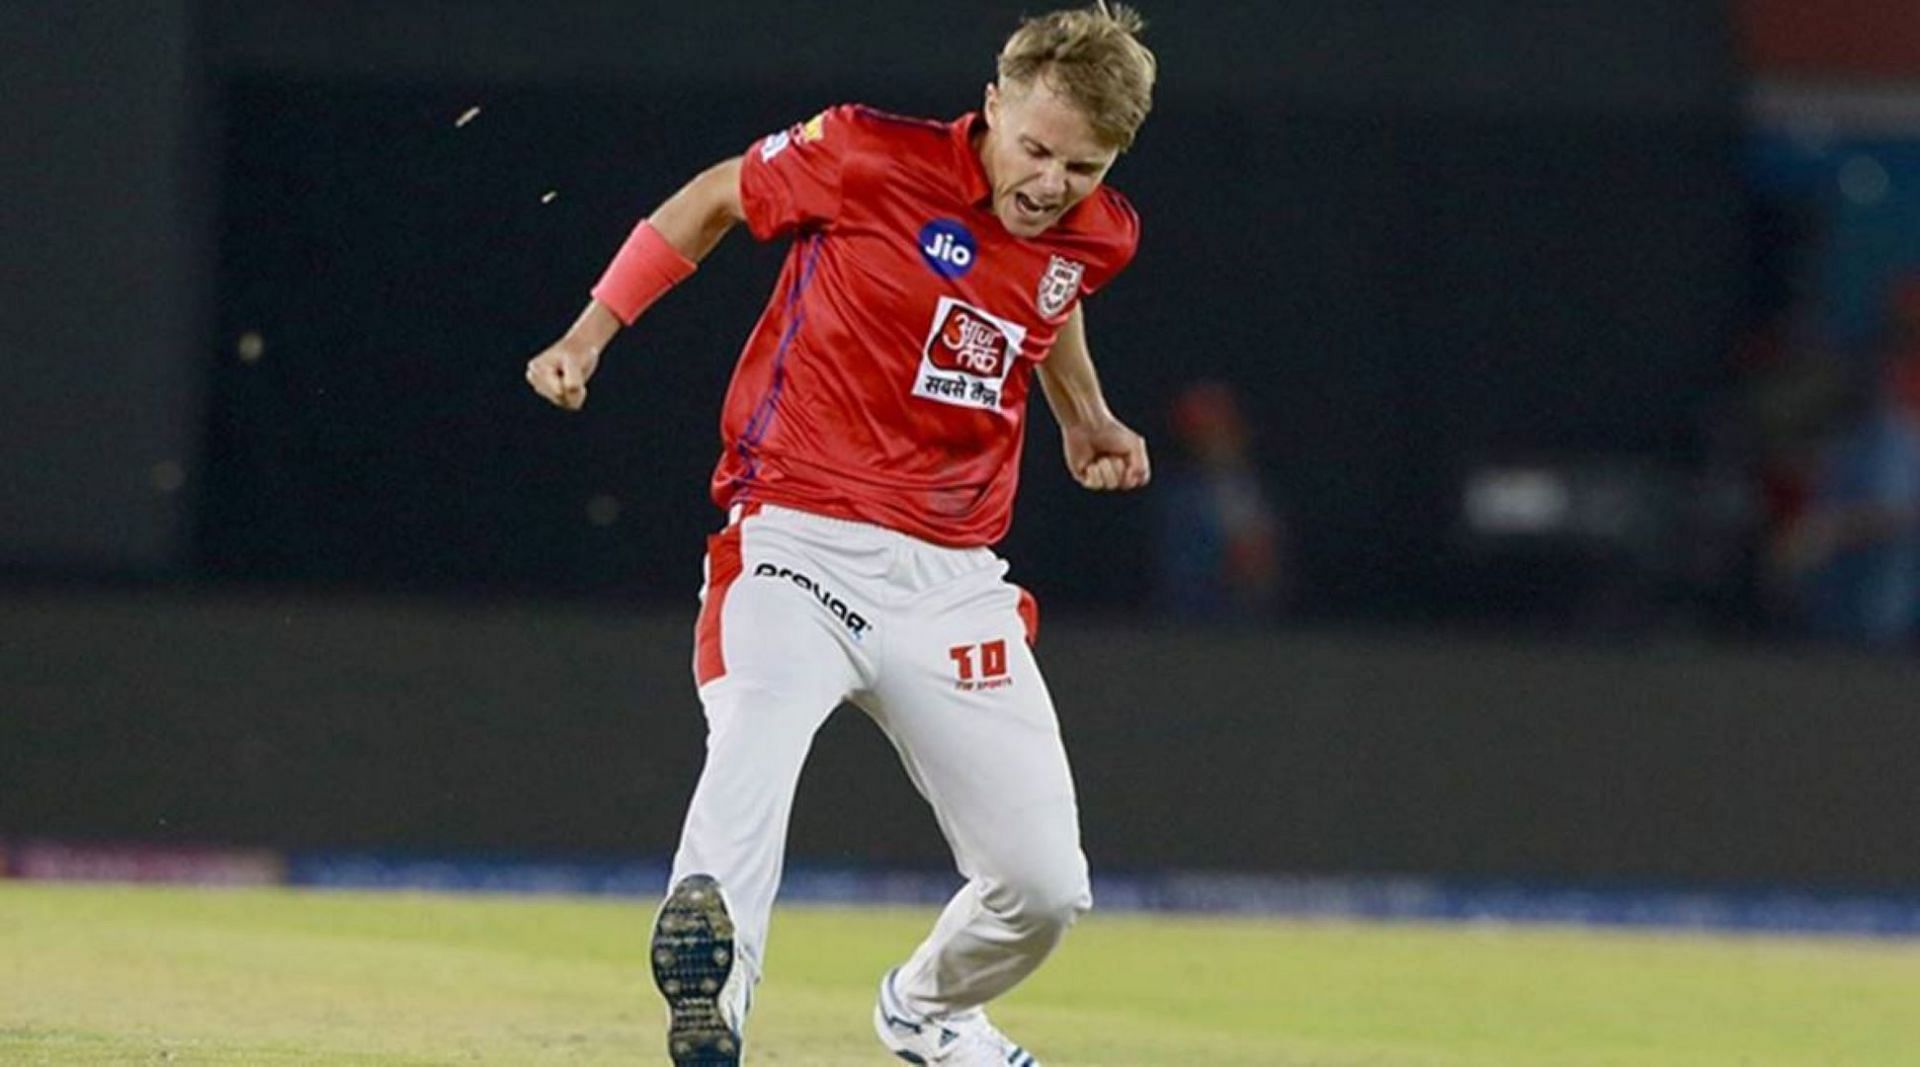 Sam Curran is back for a second stint with the Punjab Kings